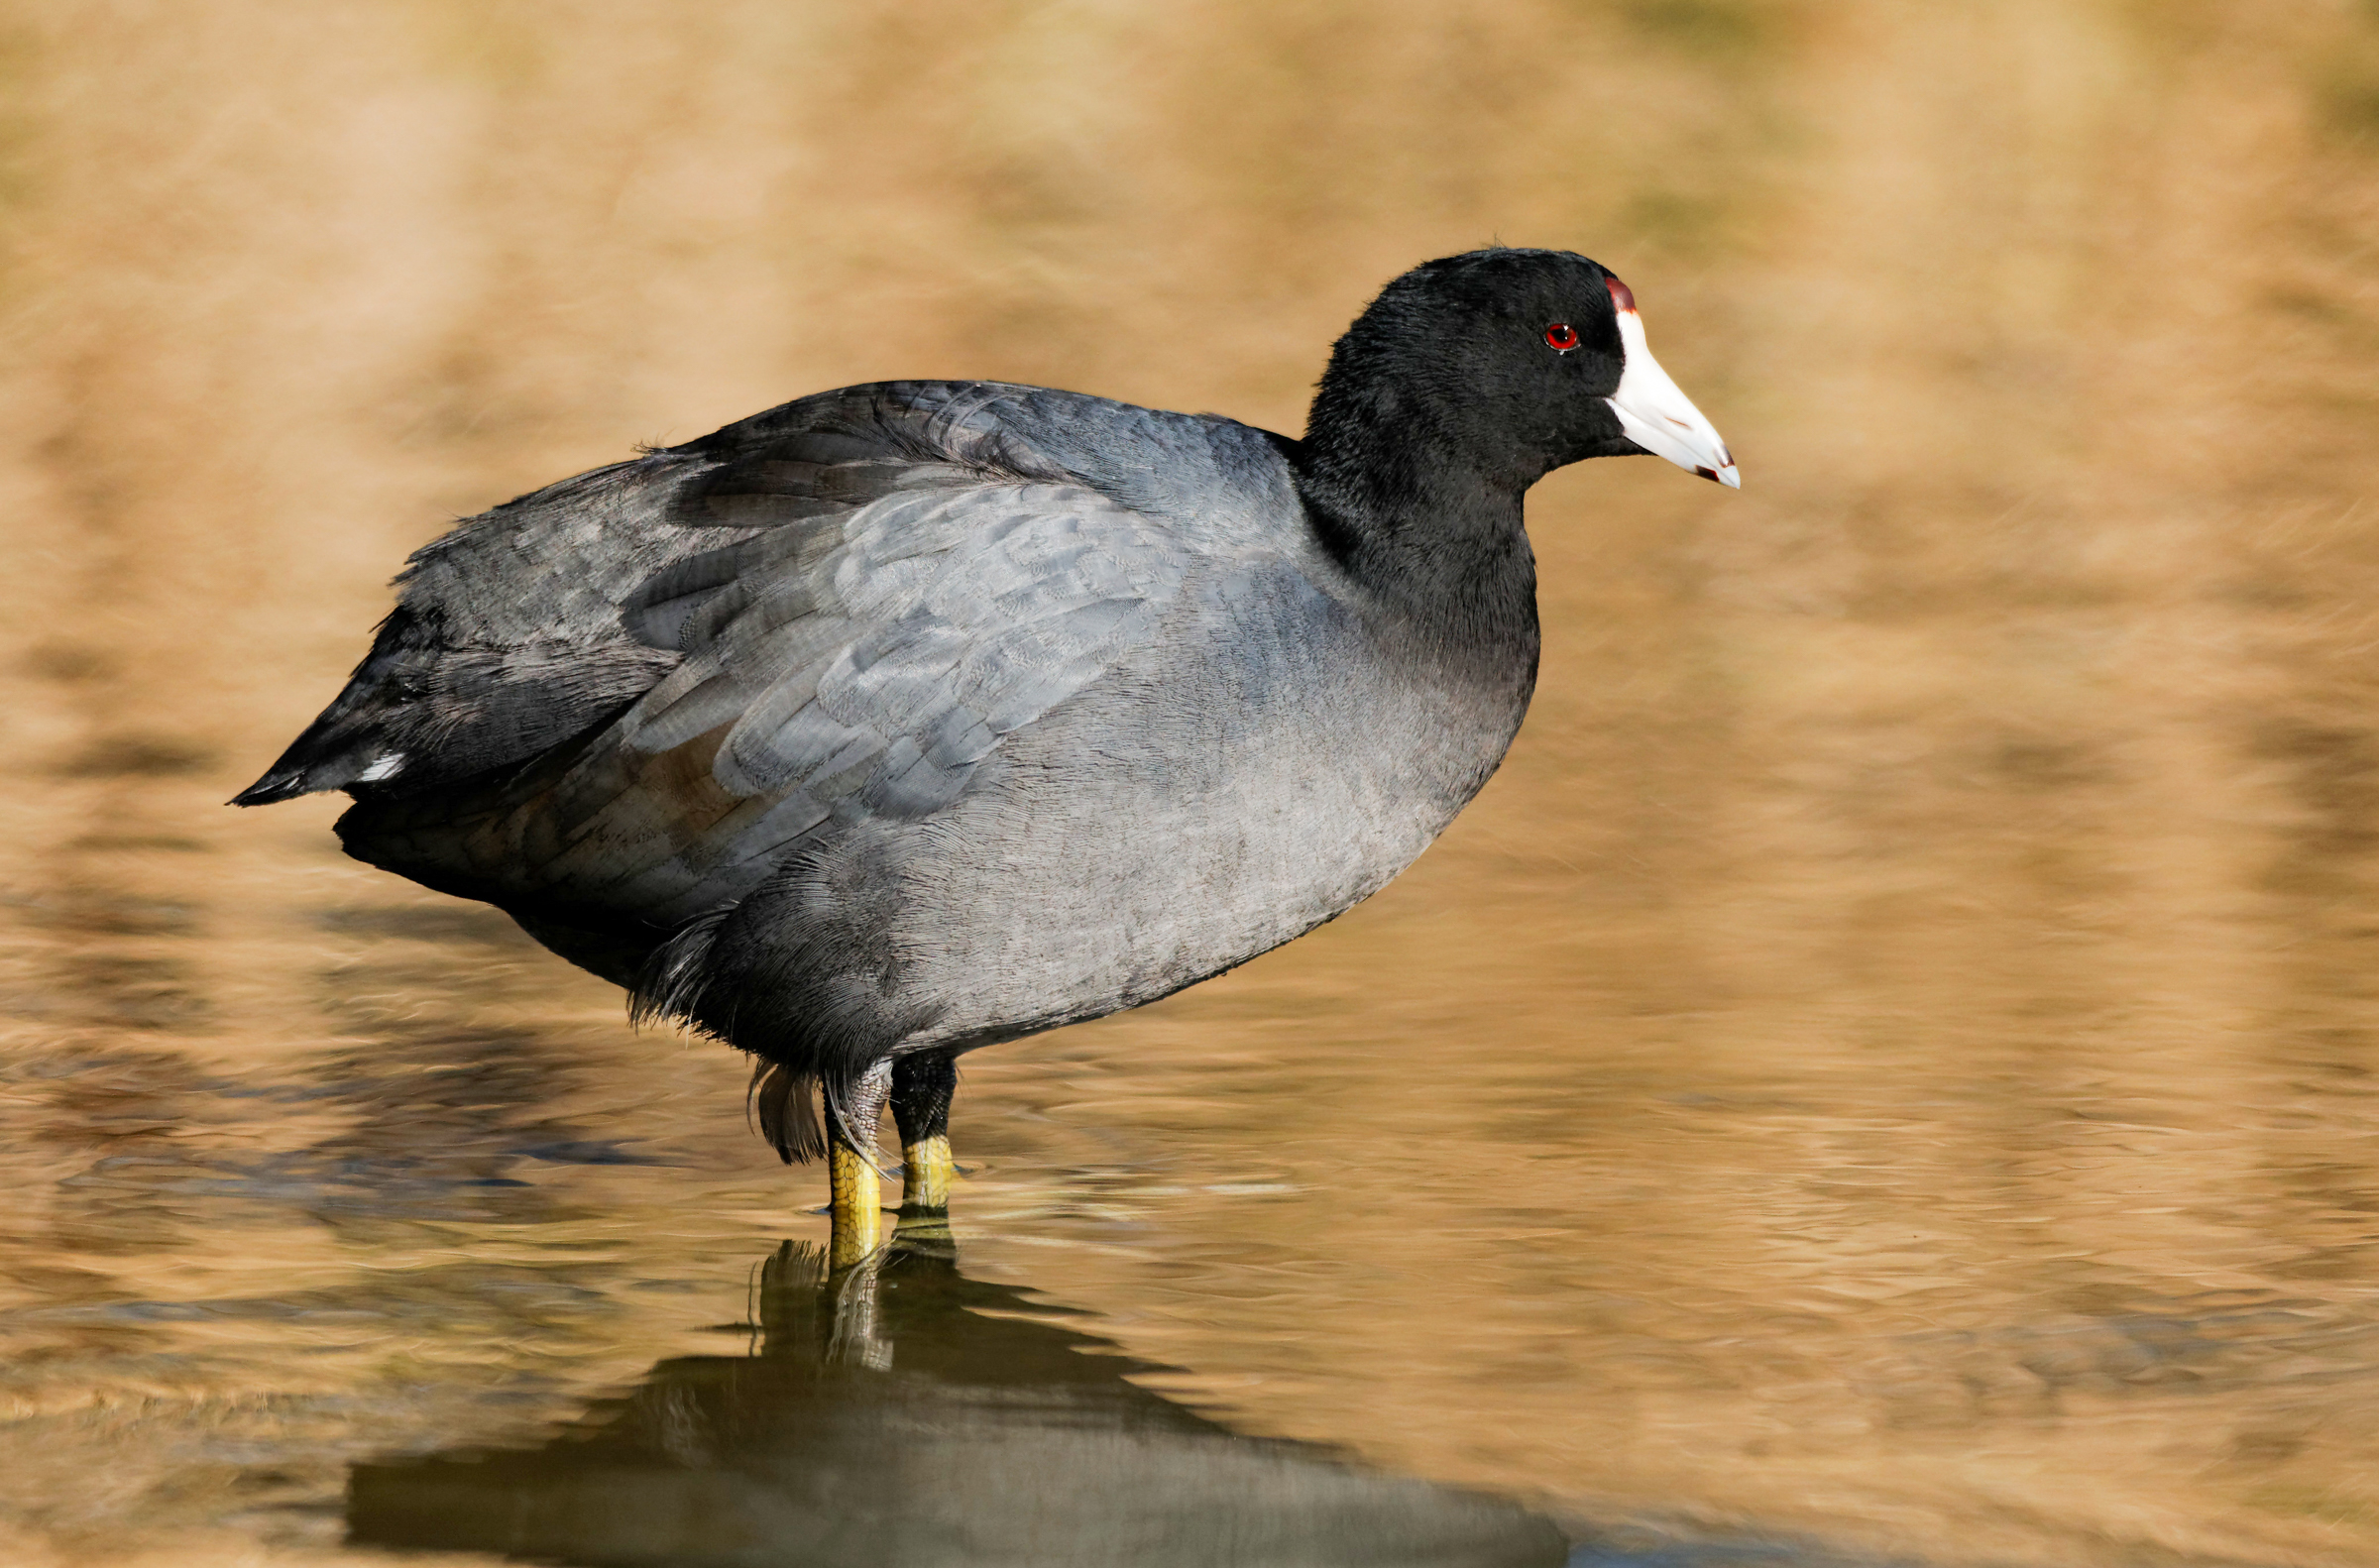 American Coot stands next to water.